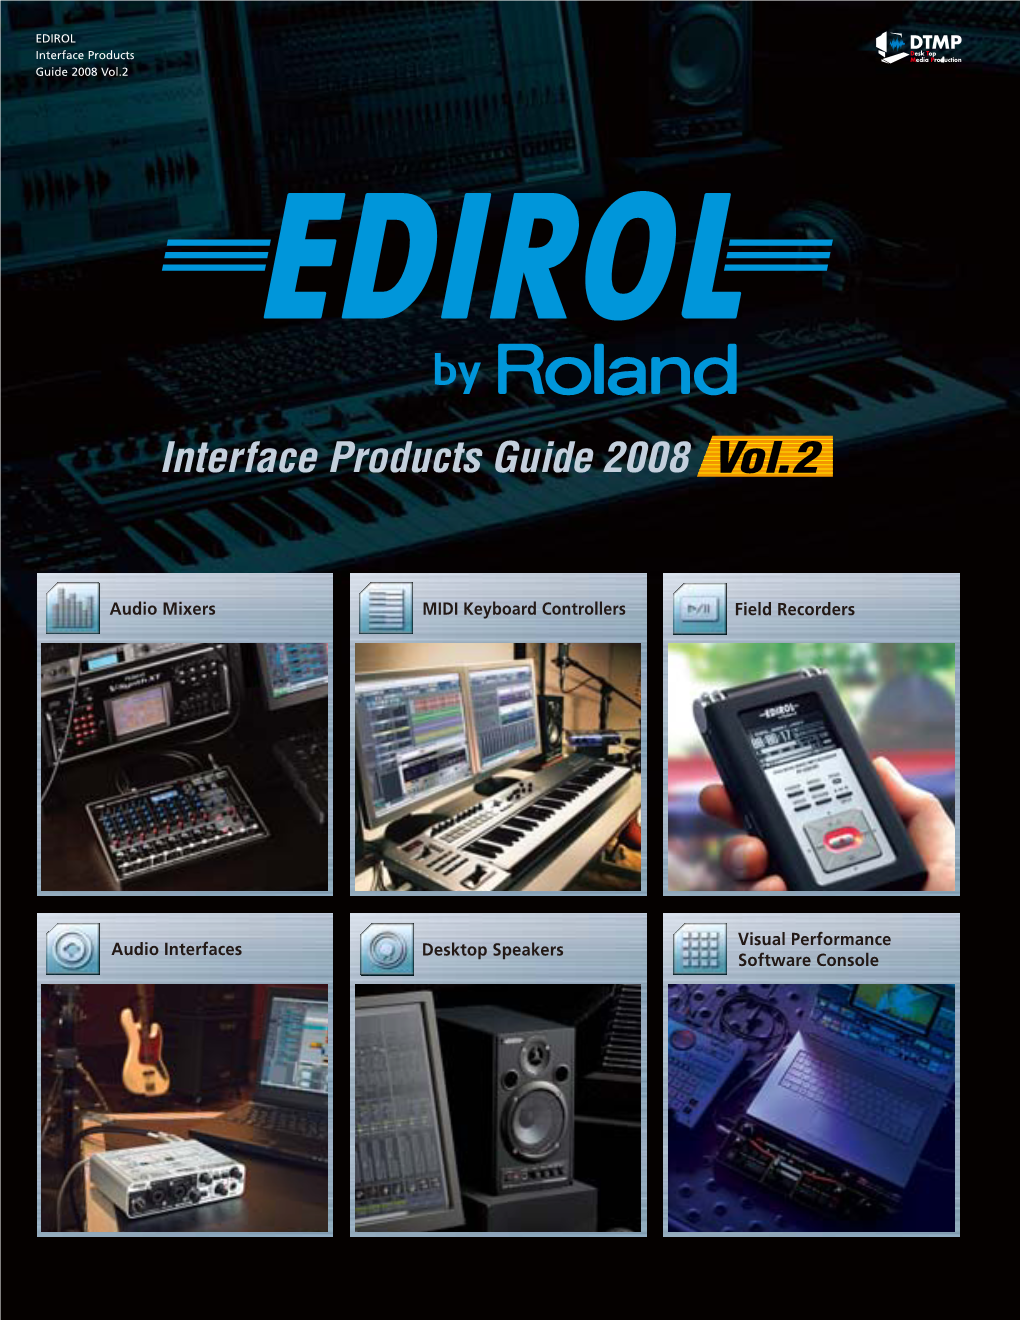 Interface Products Guide 2008 Vol.2